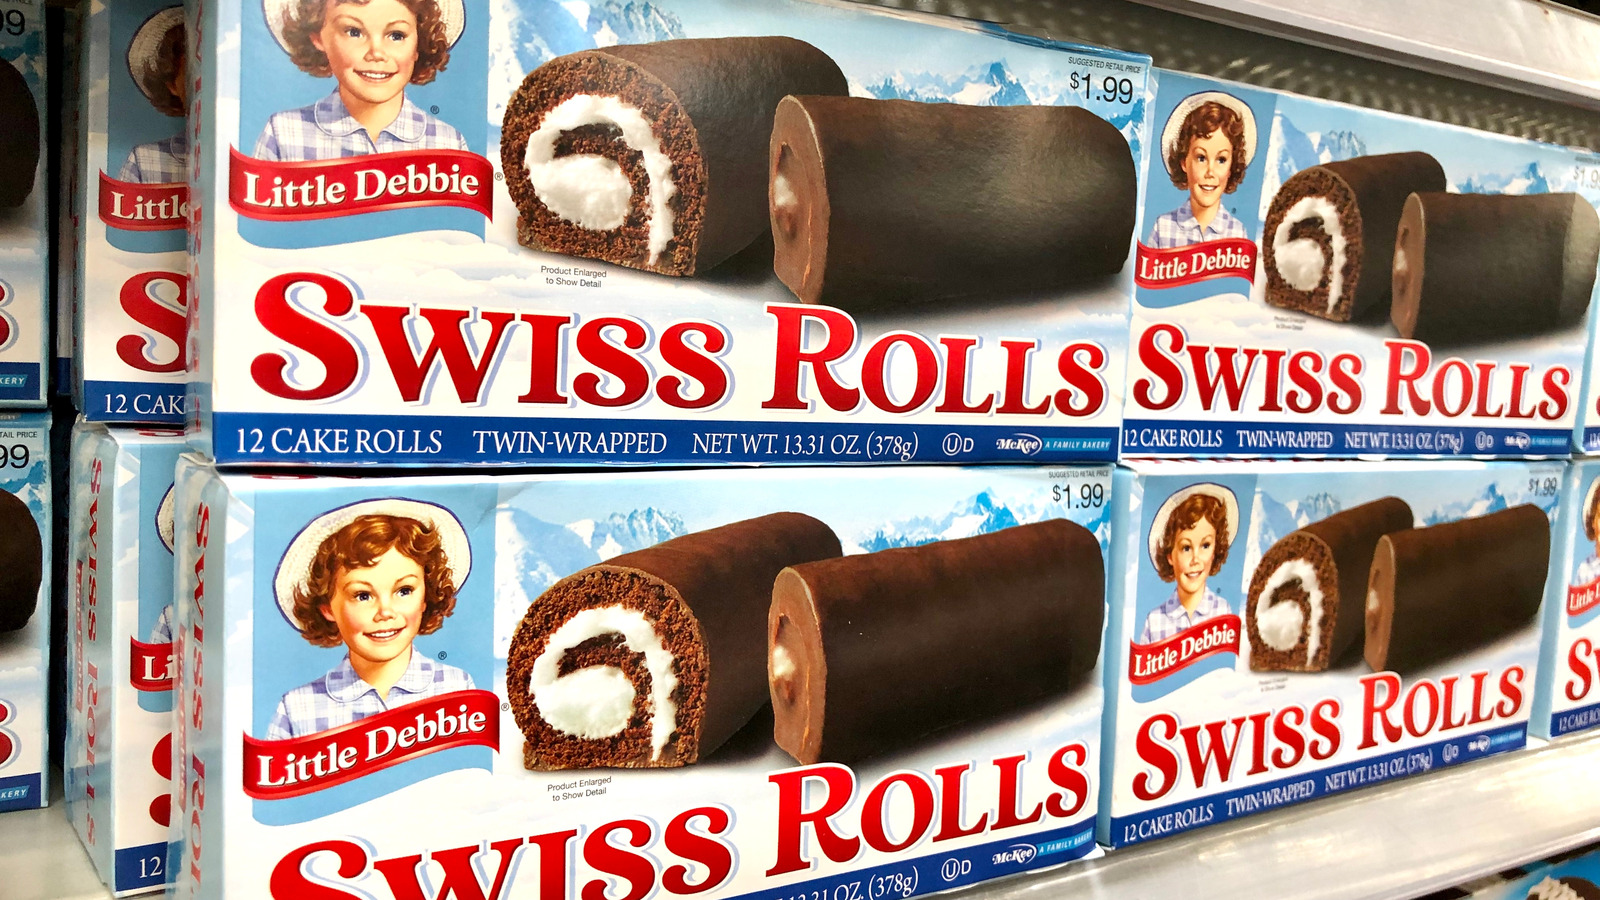 Kellogg And Little Debbie Are Teaming Up Again, This Time For Swiss Roll Cereal – The Daily Meal